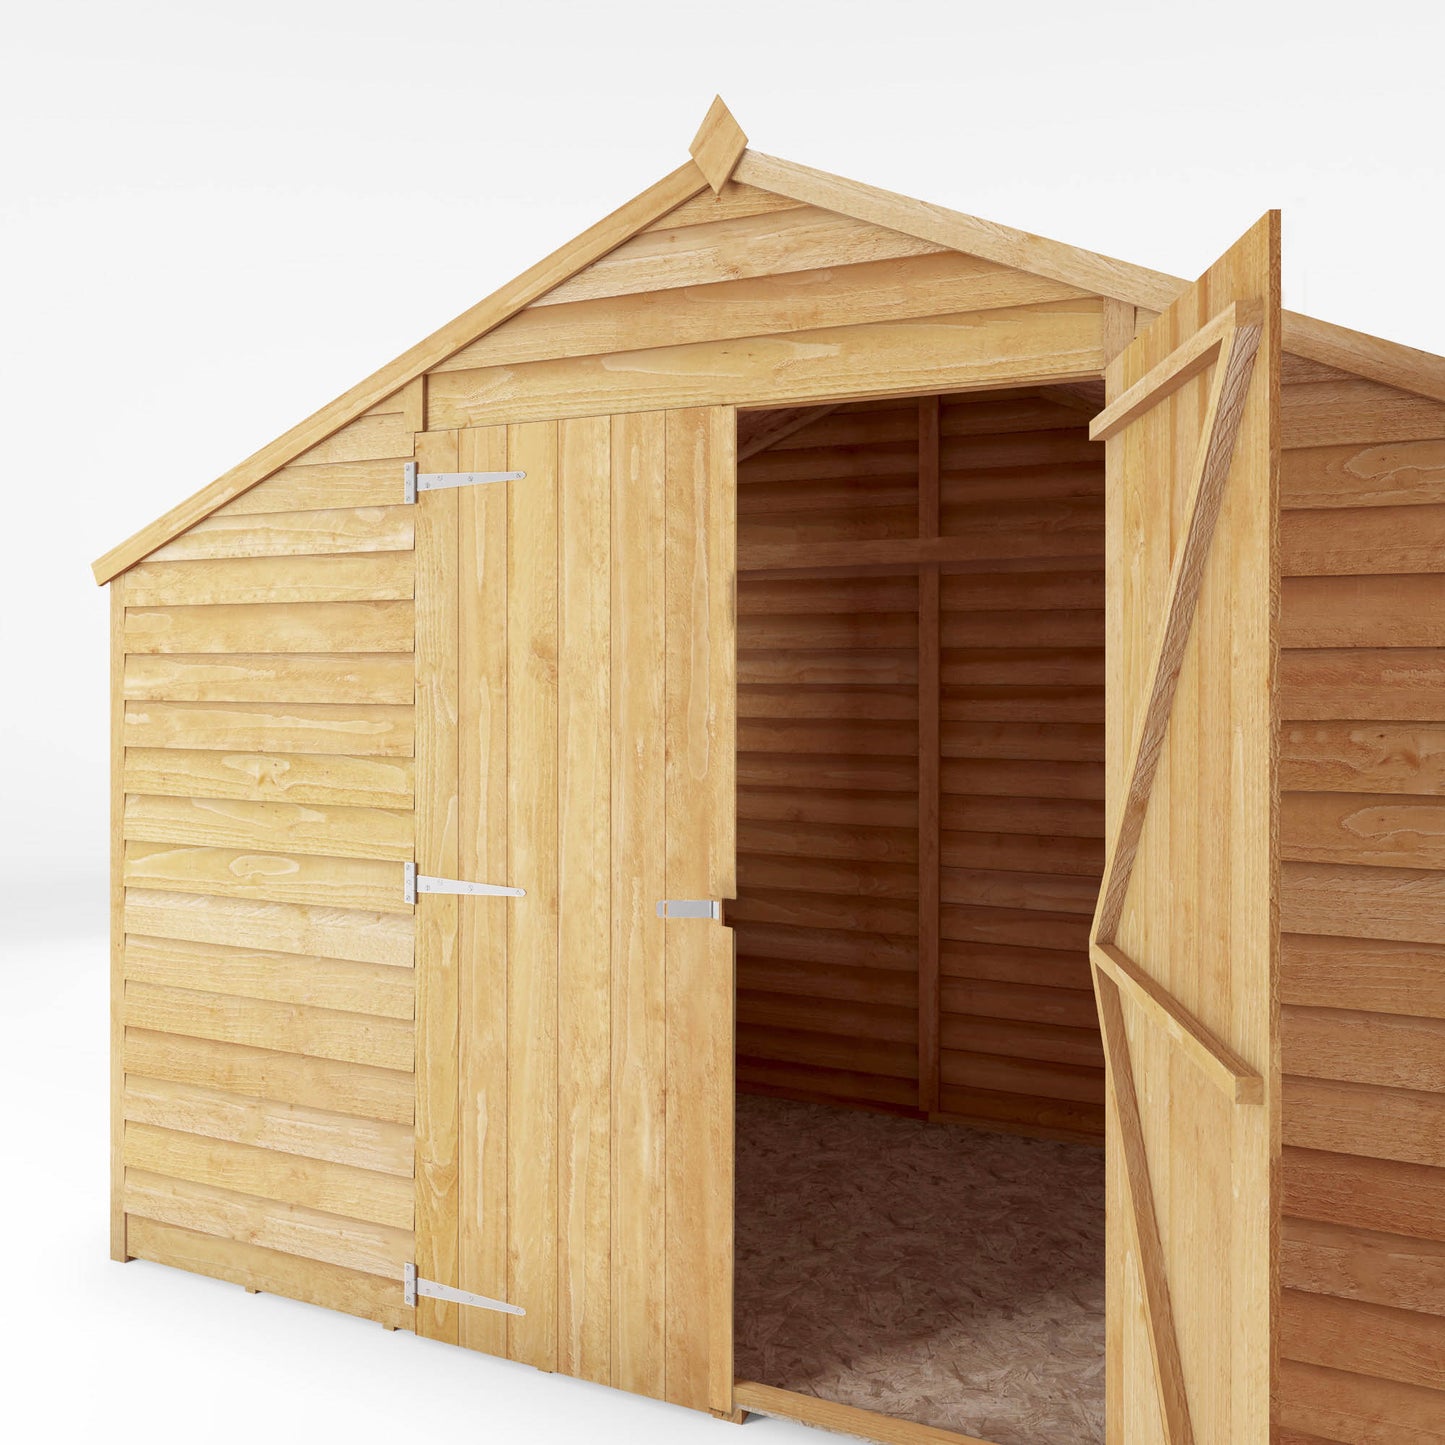 5 x 10 Overlap Apex Wooden Shed